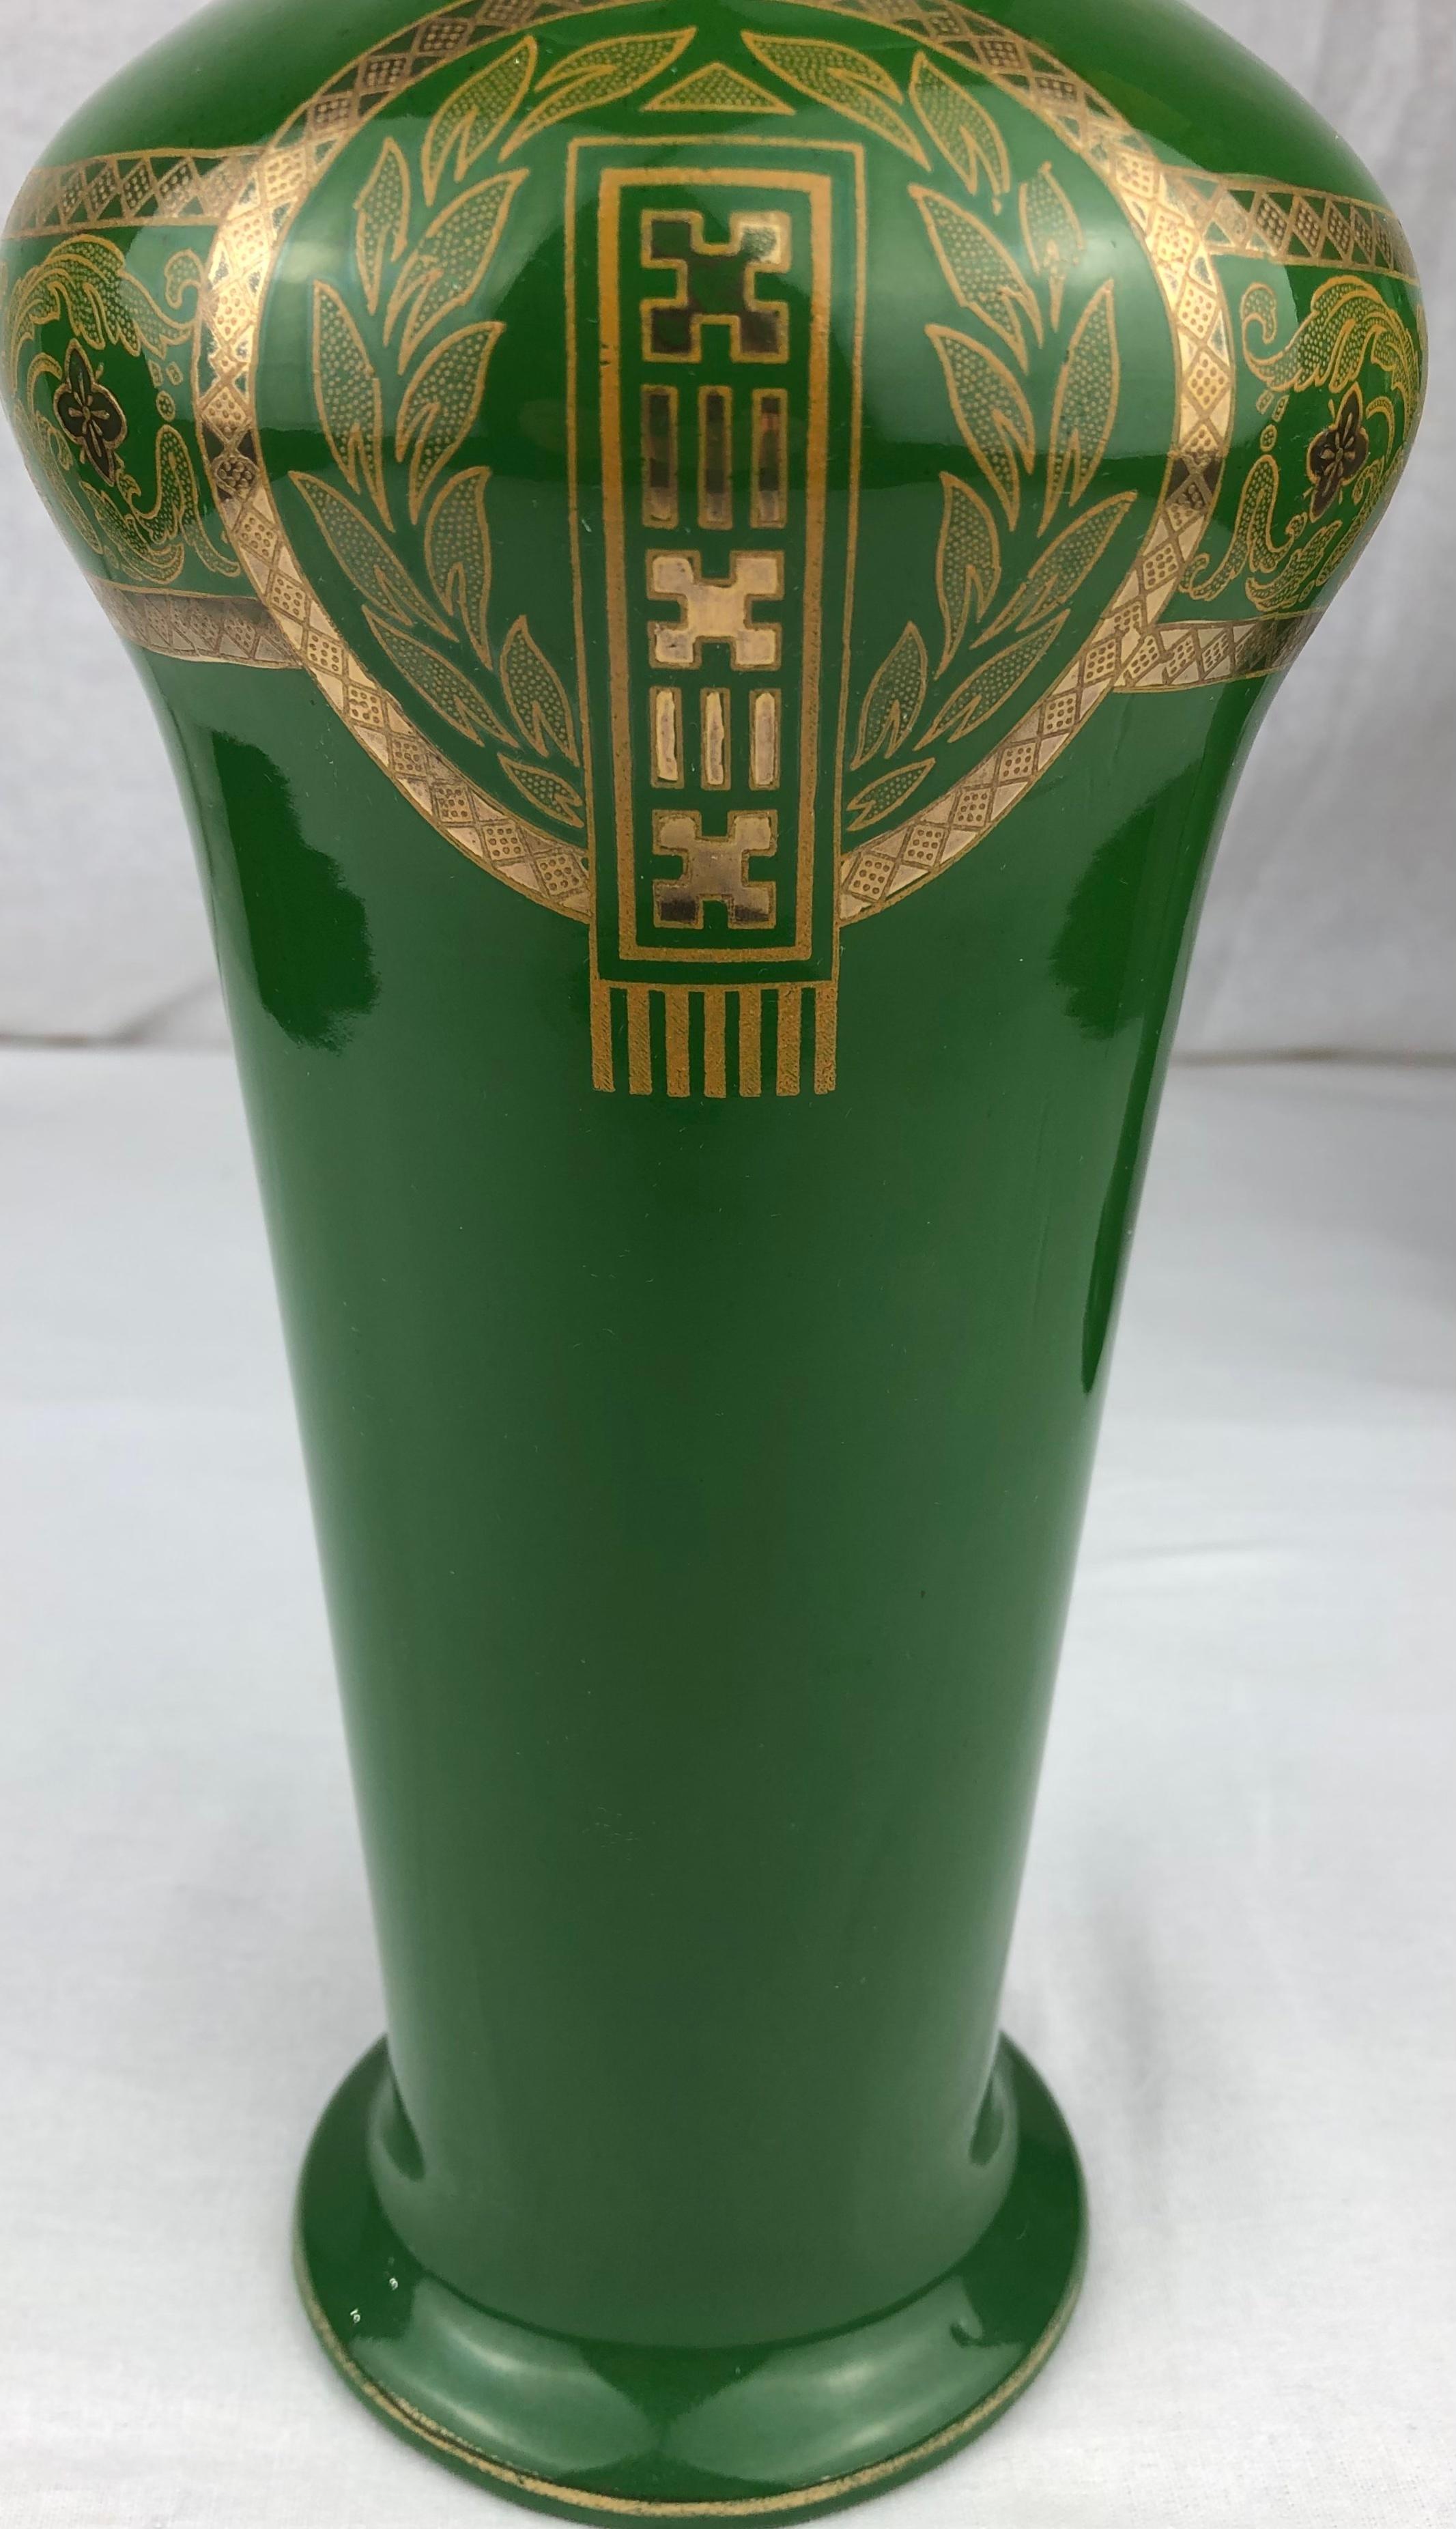 Intricately detailed pair of French Art Deco porcelain vases manufactured by Sarreguemines. These fine quality vases are made from very good quality porcelain and are in very good antique condition. 
Stunning green and gold colors under a glazed